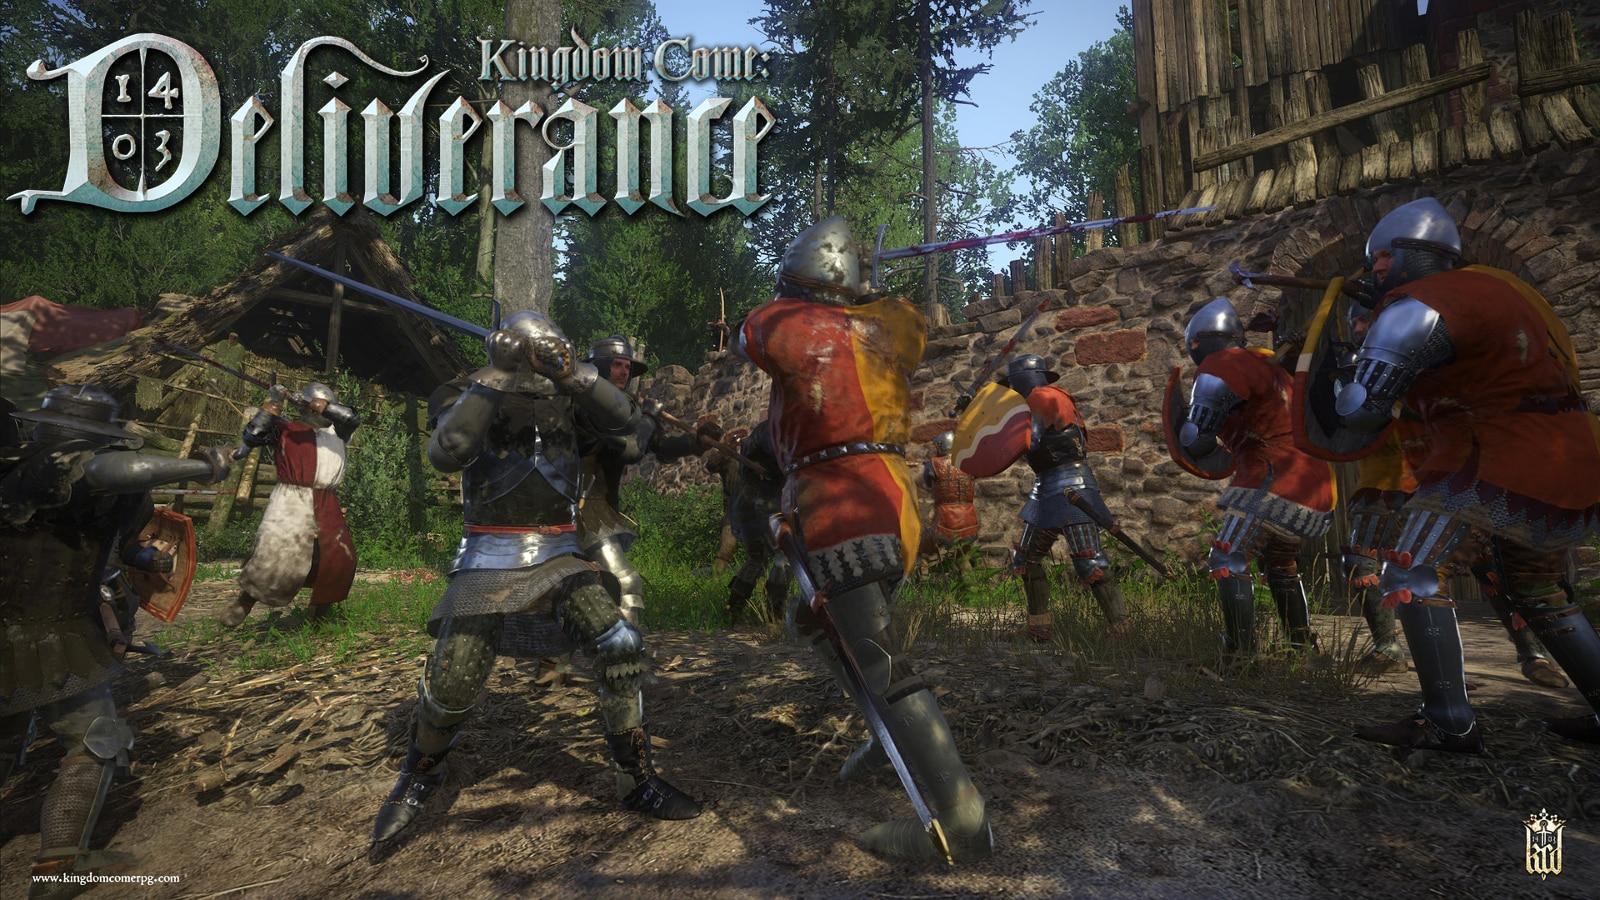 An image of Kingdom Come Deliverance gameplay, which is like Skyrim.